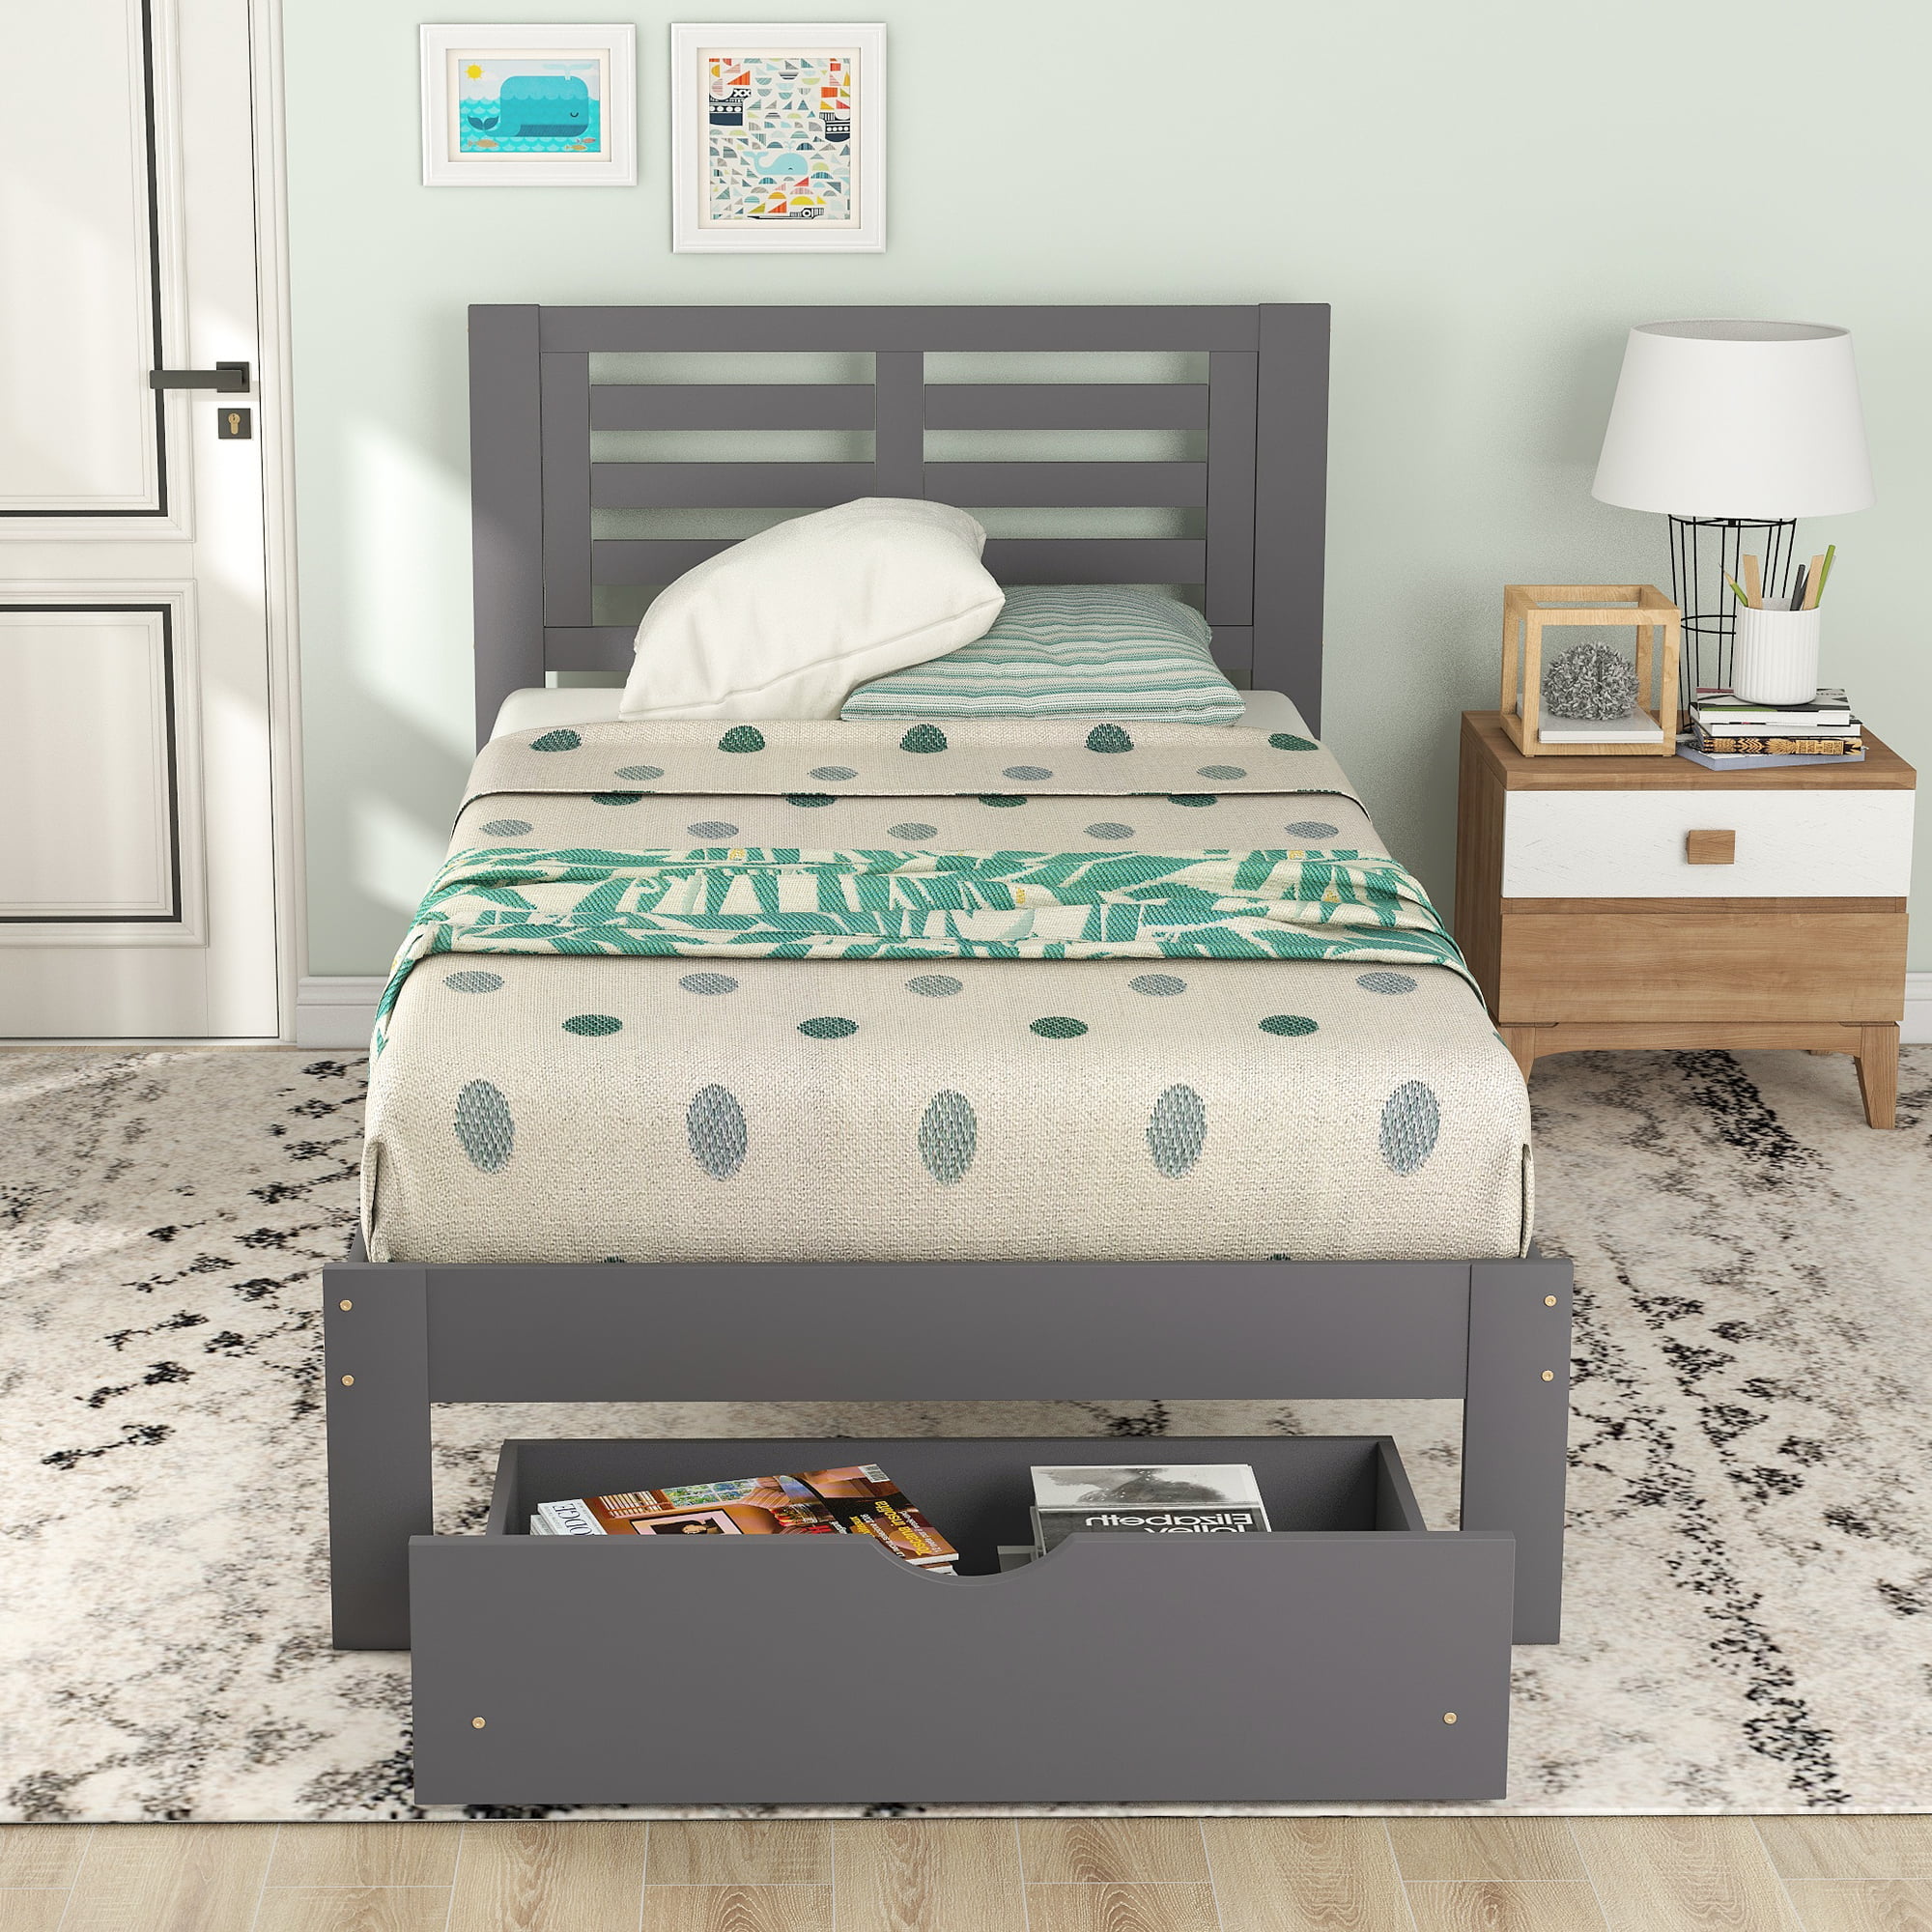 Twin Bed Frame For Kids S Upgrade, Kid Bed Frame With Storage